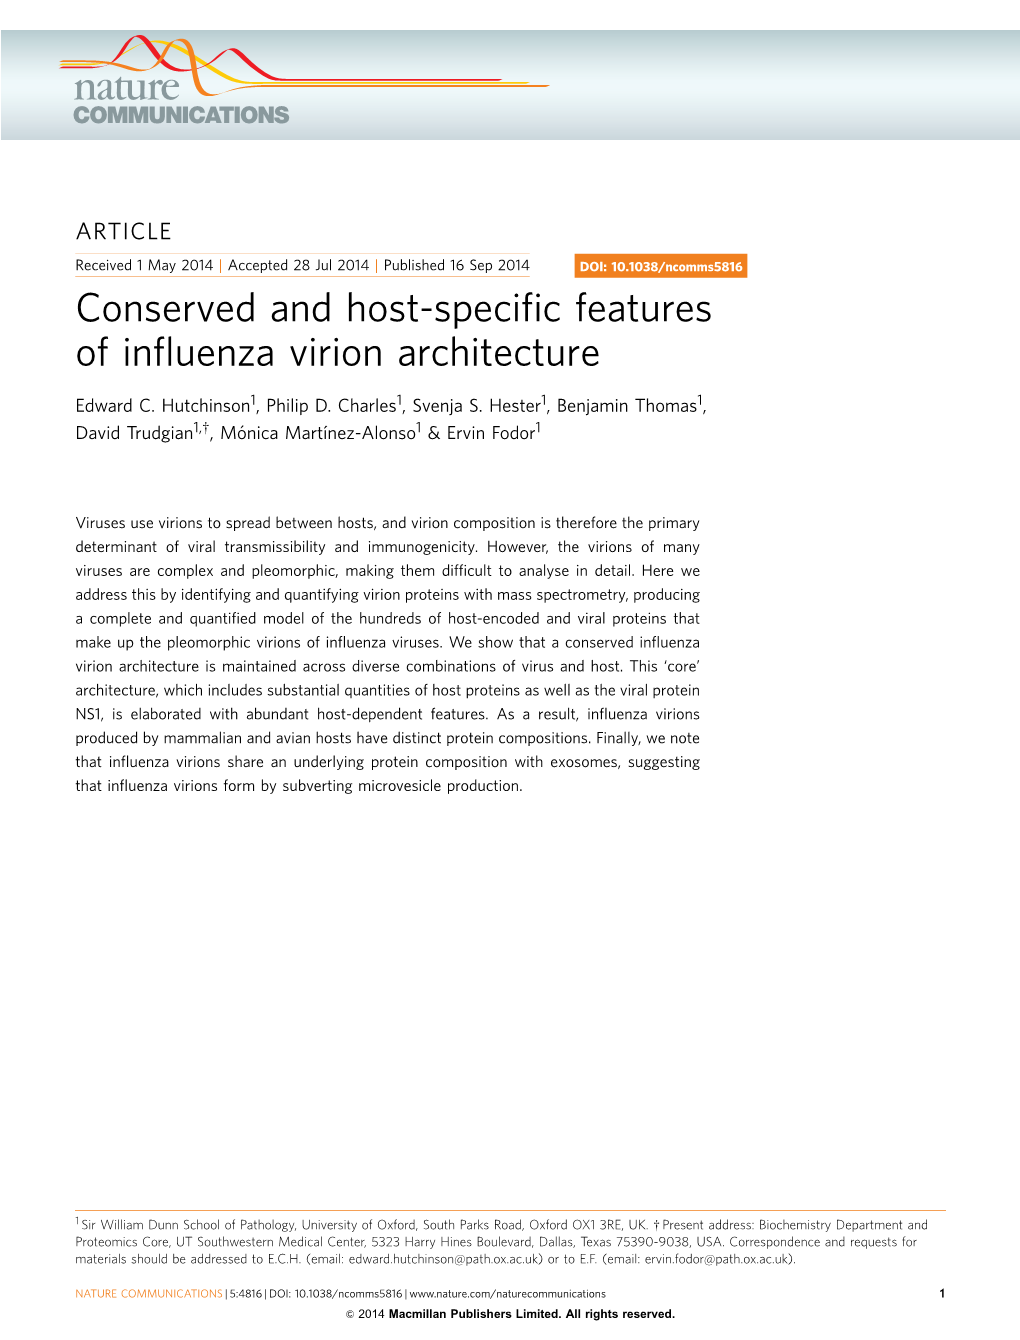 Conserved and Host-Specific Features of Influenza Virion Architecture